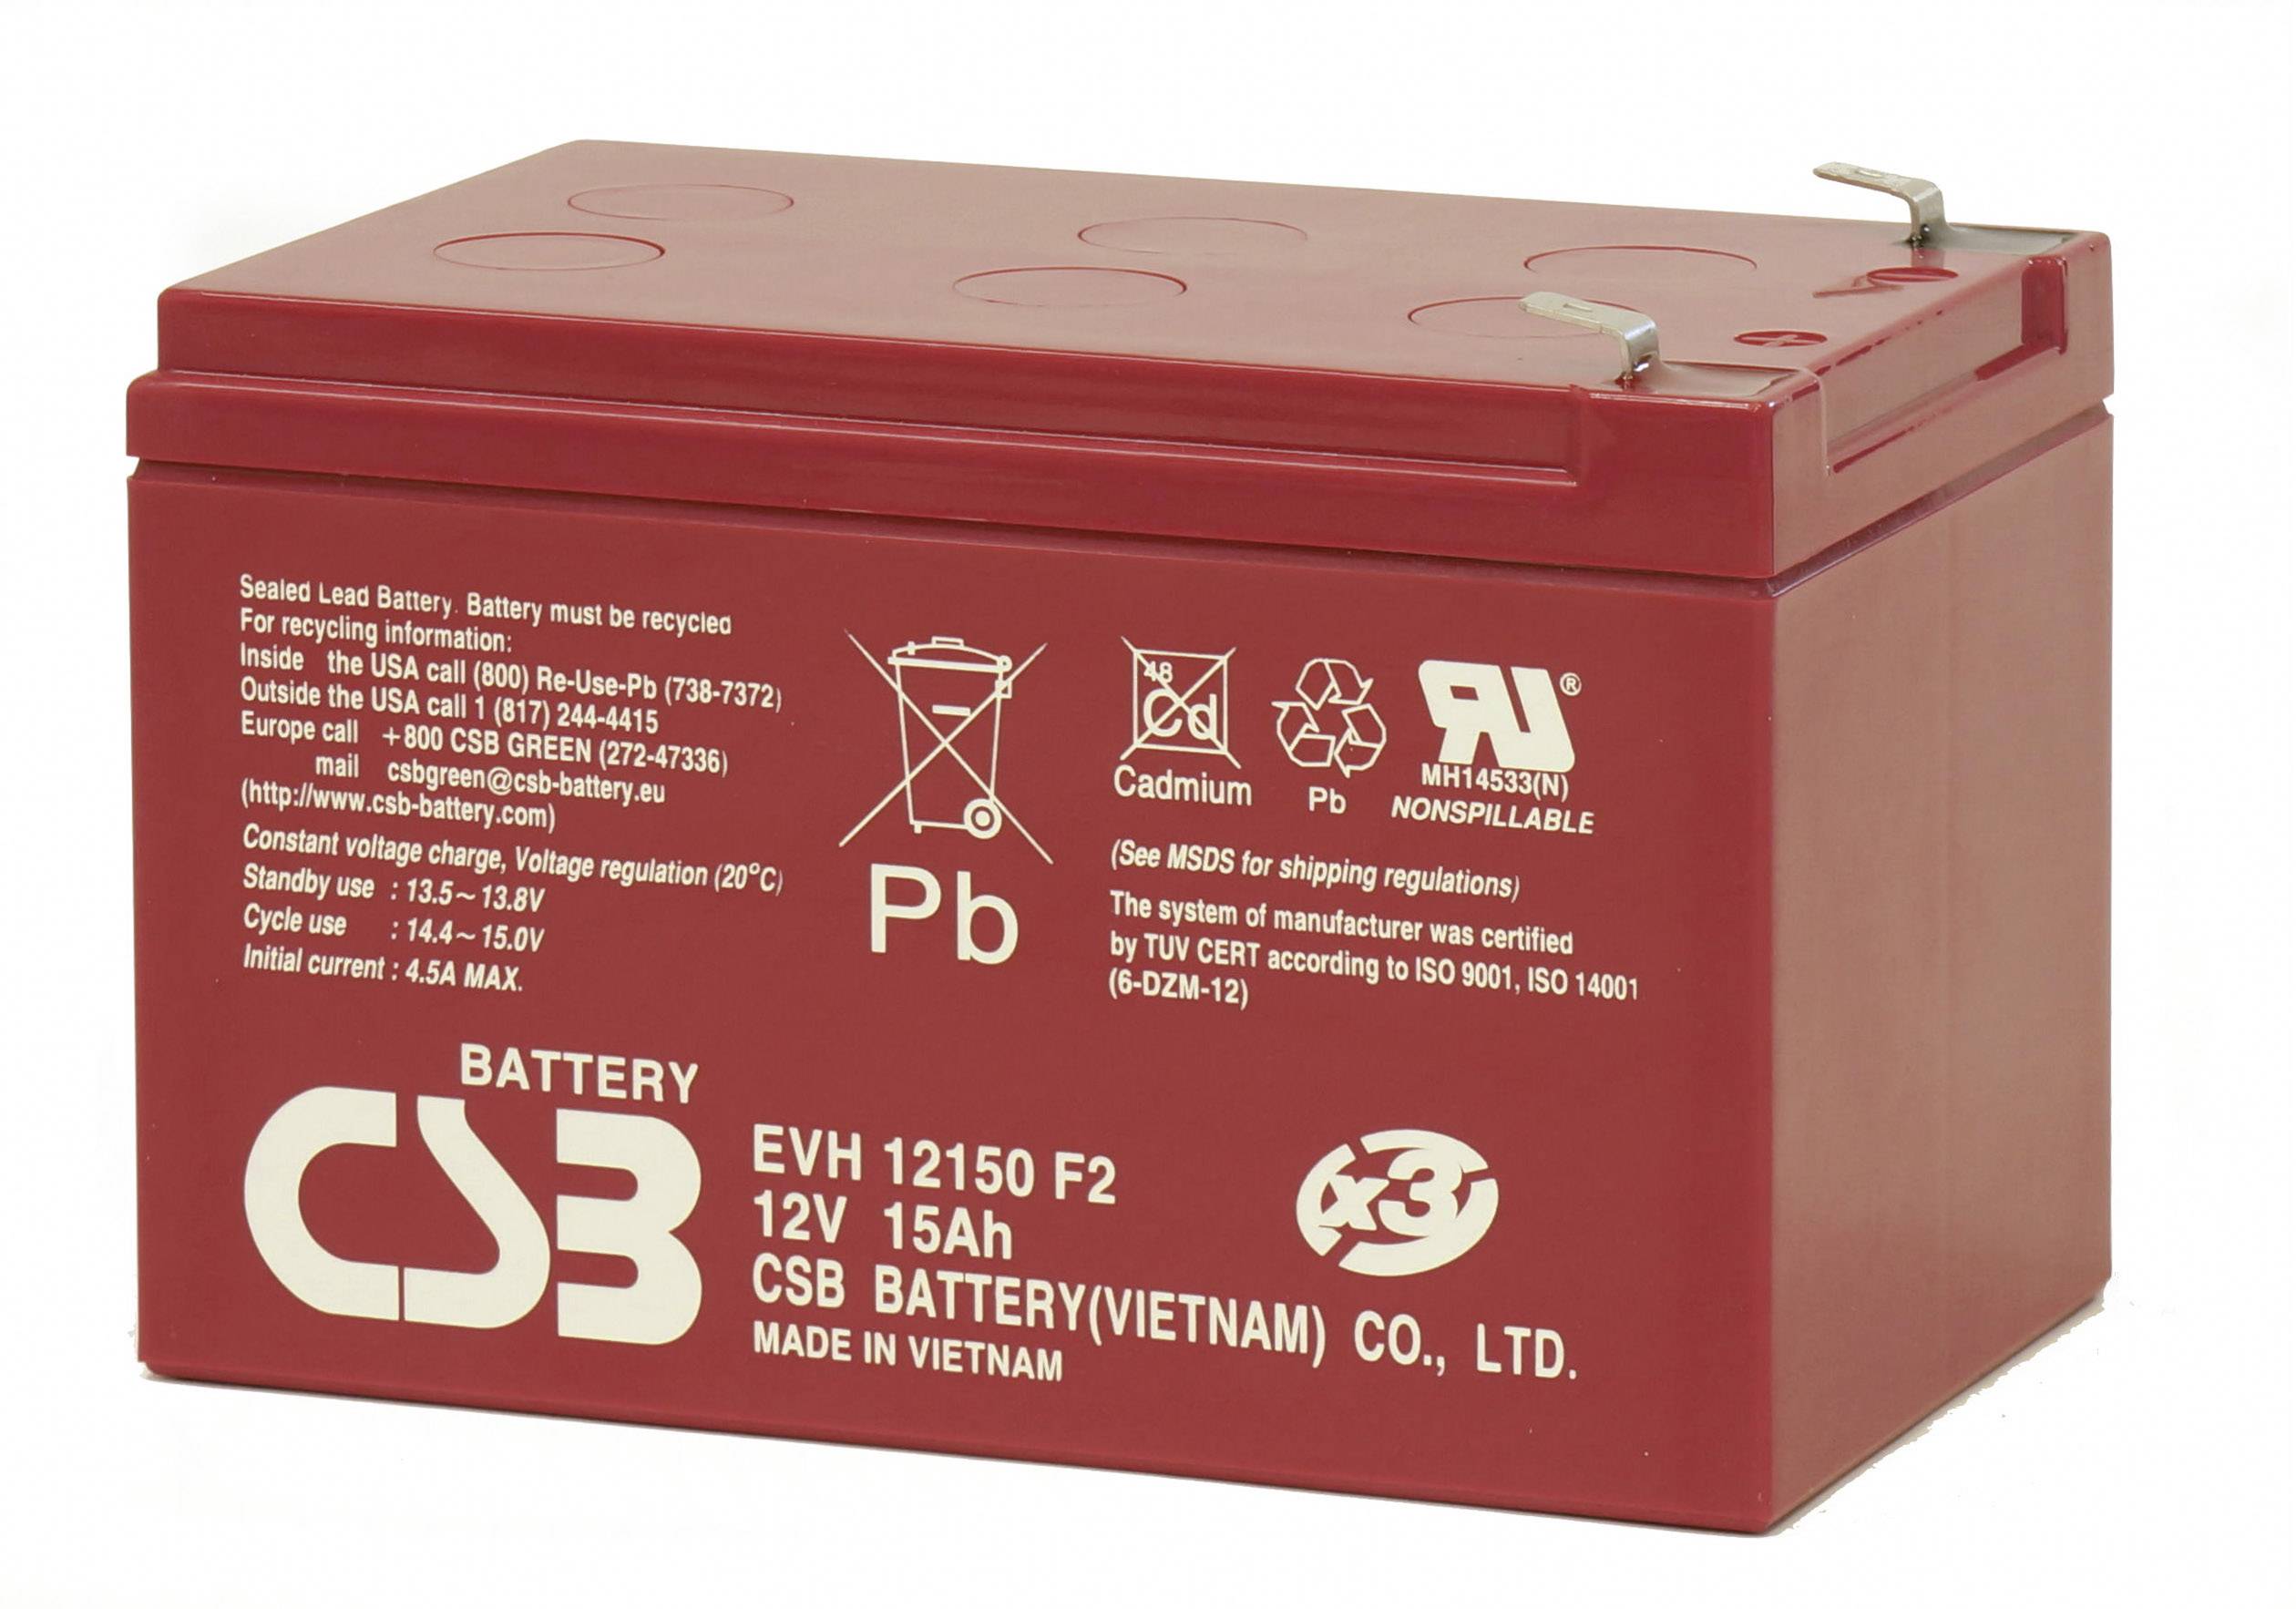 show original title Details about   Battery pack COD 3x 12V/15Ah 36V Lead Battery Mach 1 Electric Scooter EVH 12150F2 1543 